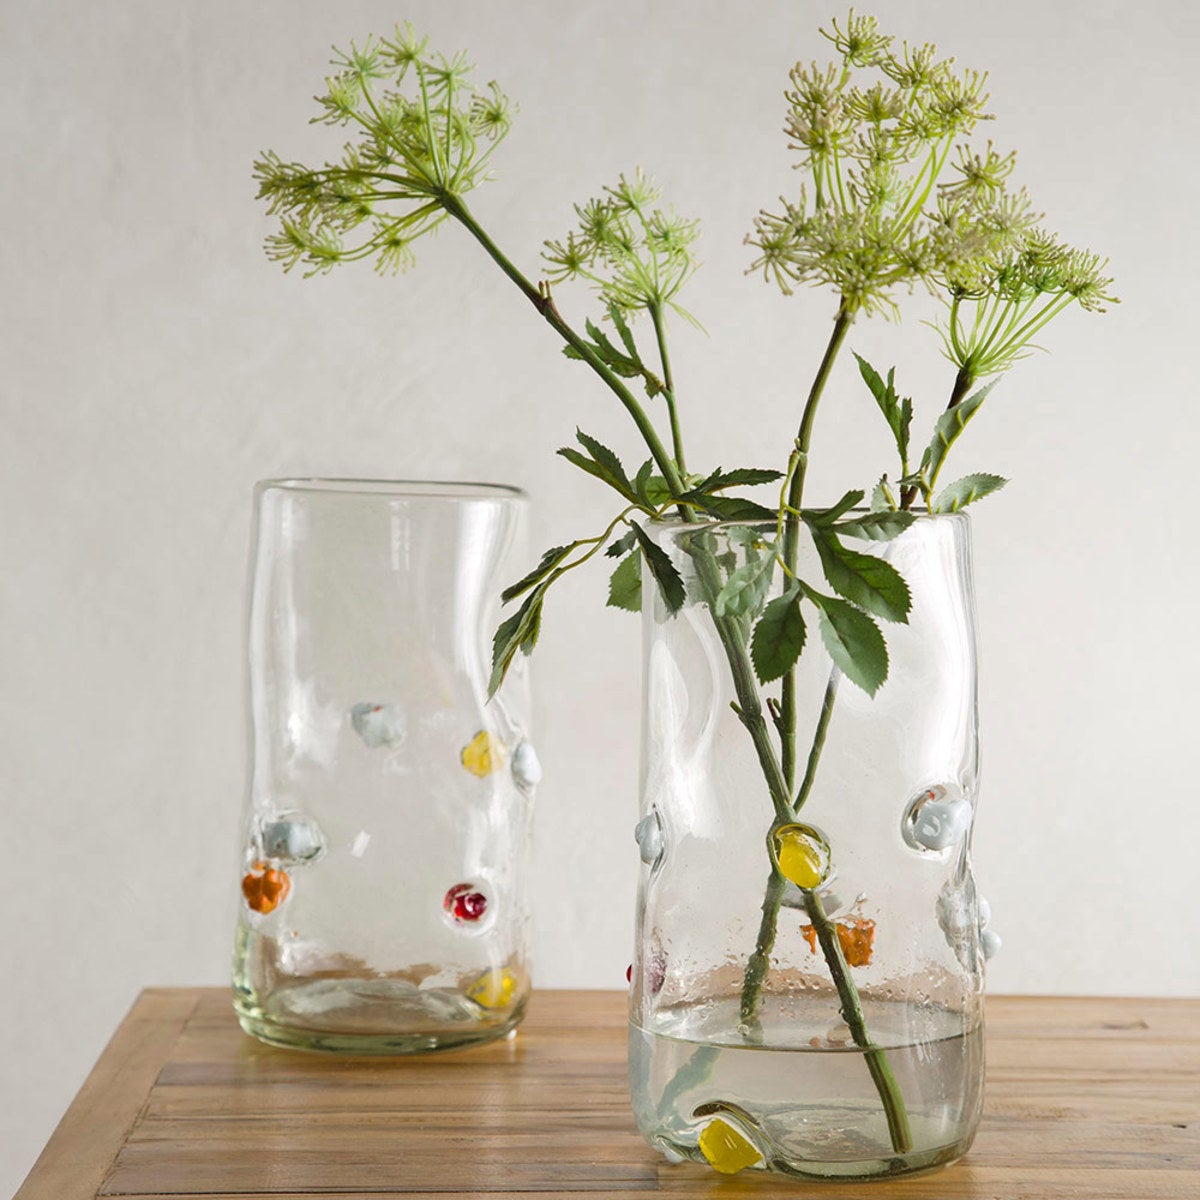 Bright Spot Recycled Glass Vases